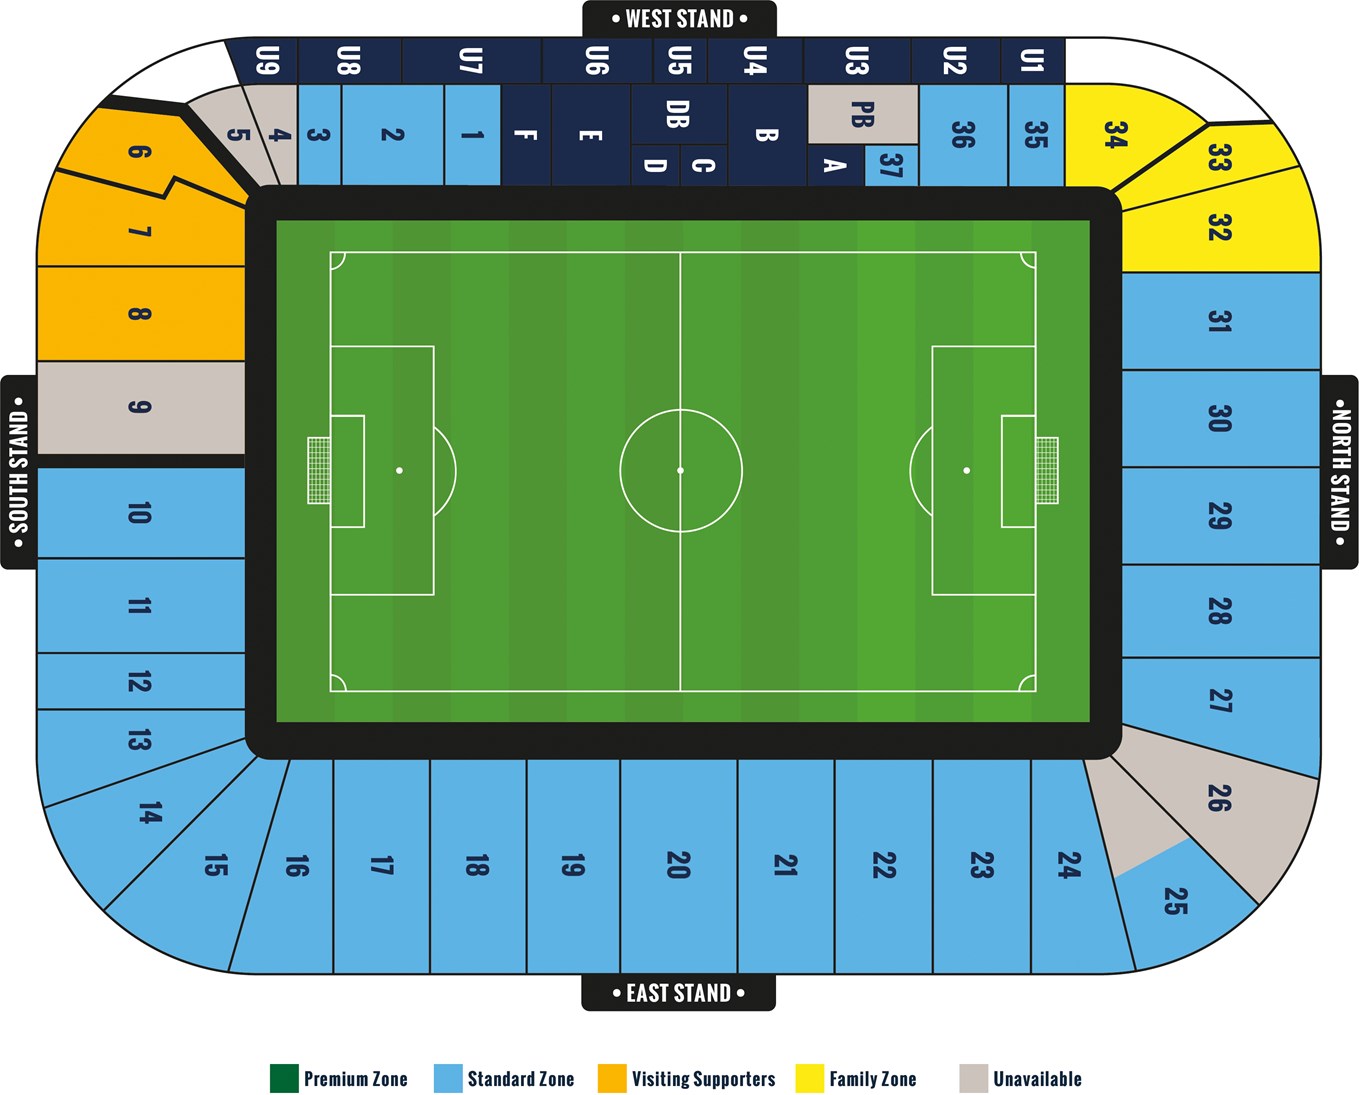 23-24-new south stand config 23-24 trial.jpg